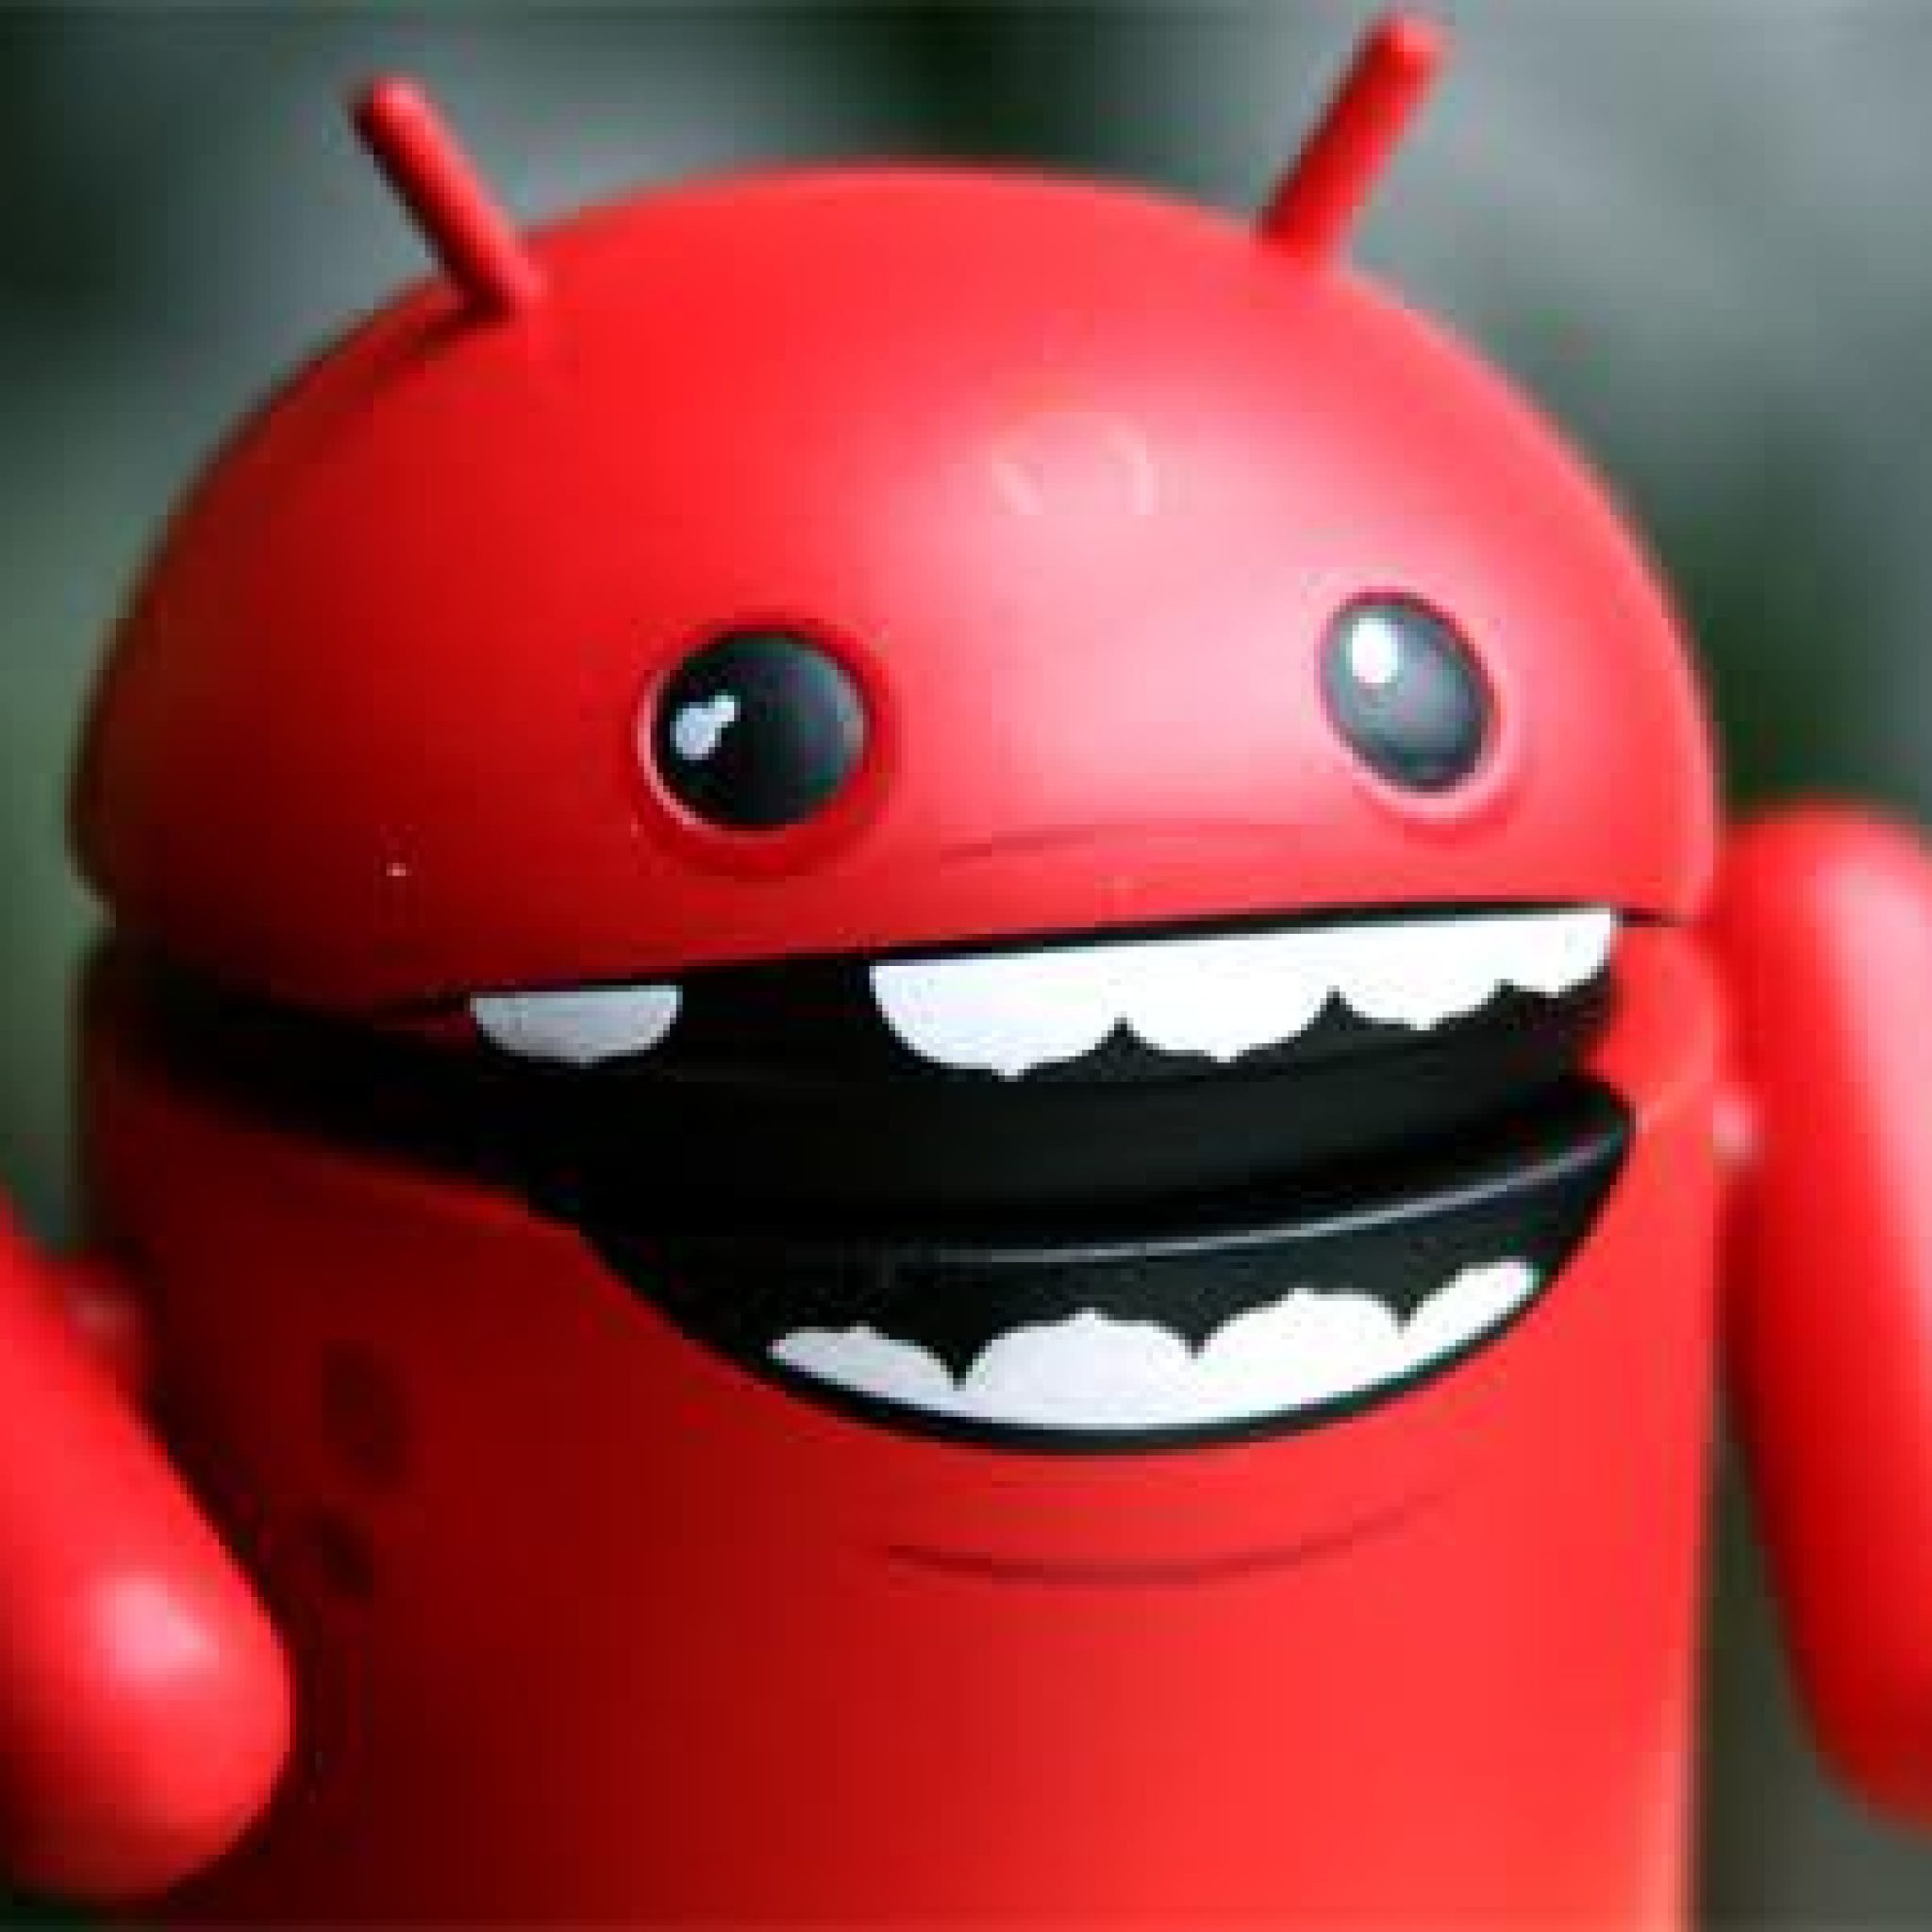 Android.counterclank: Un Malware Para Android